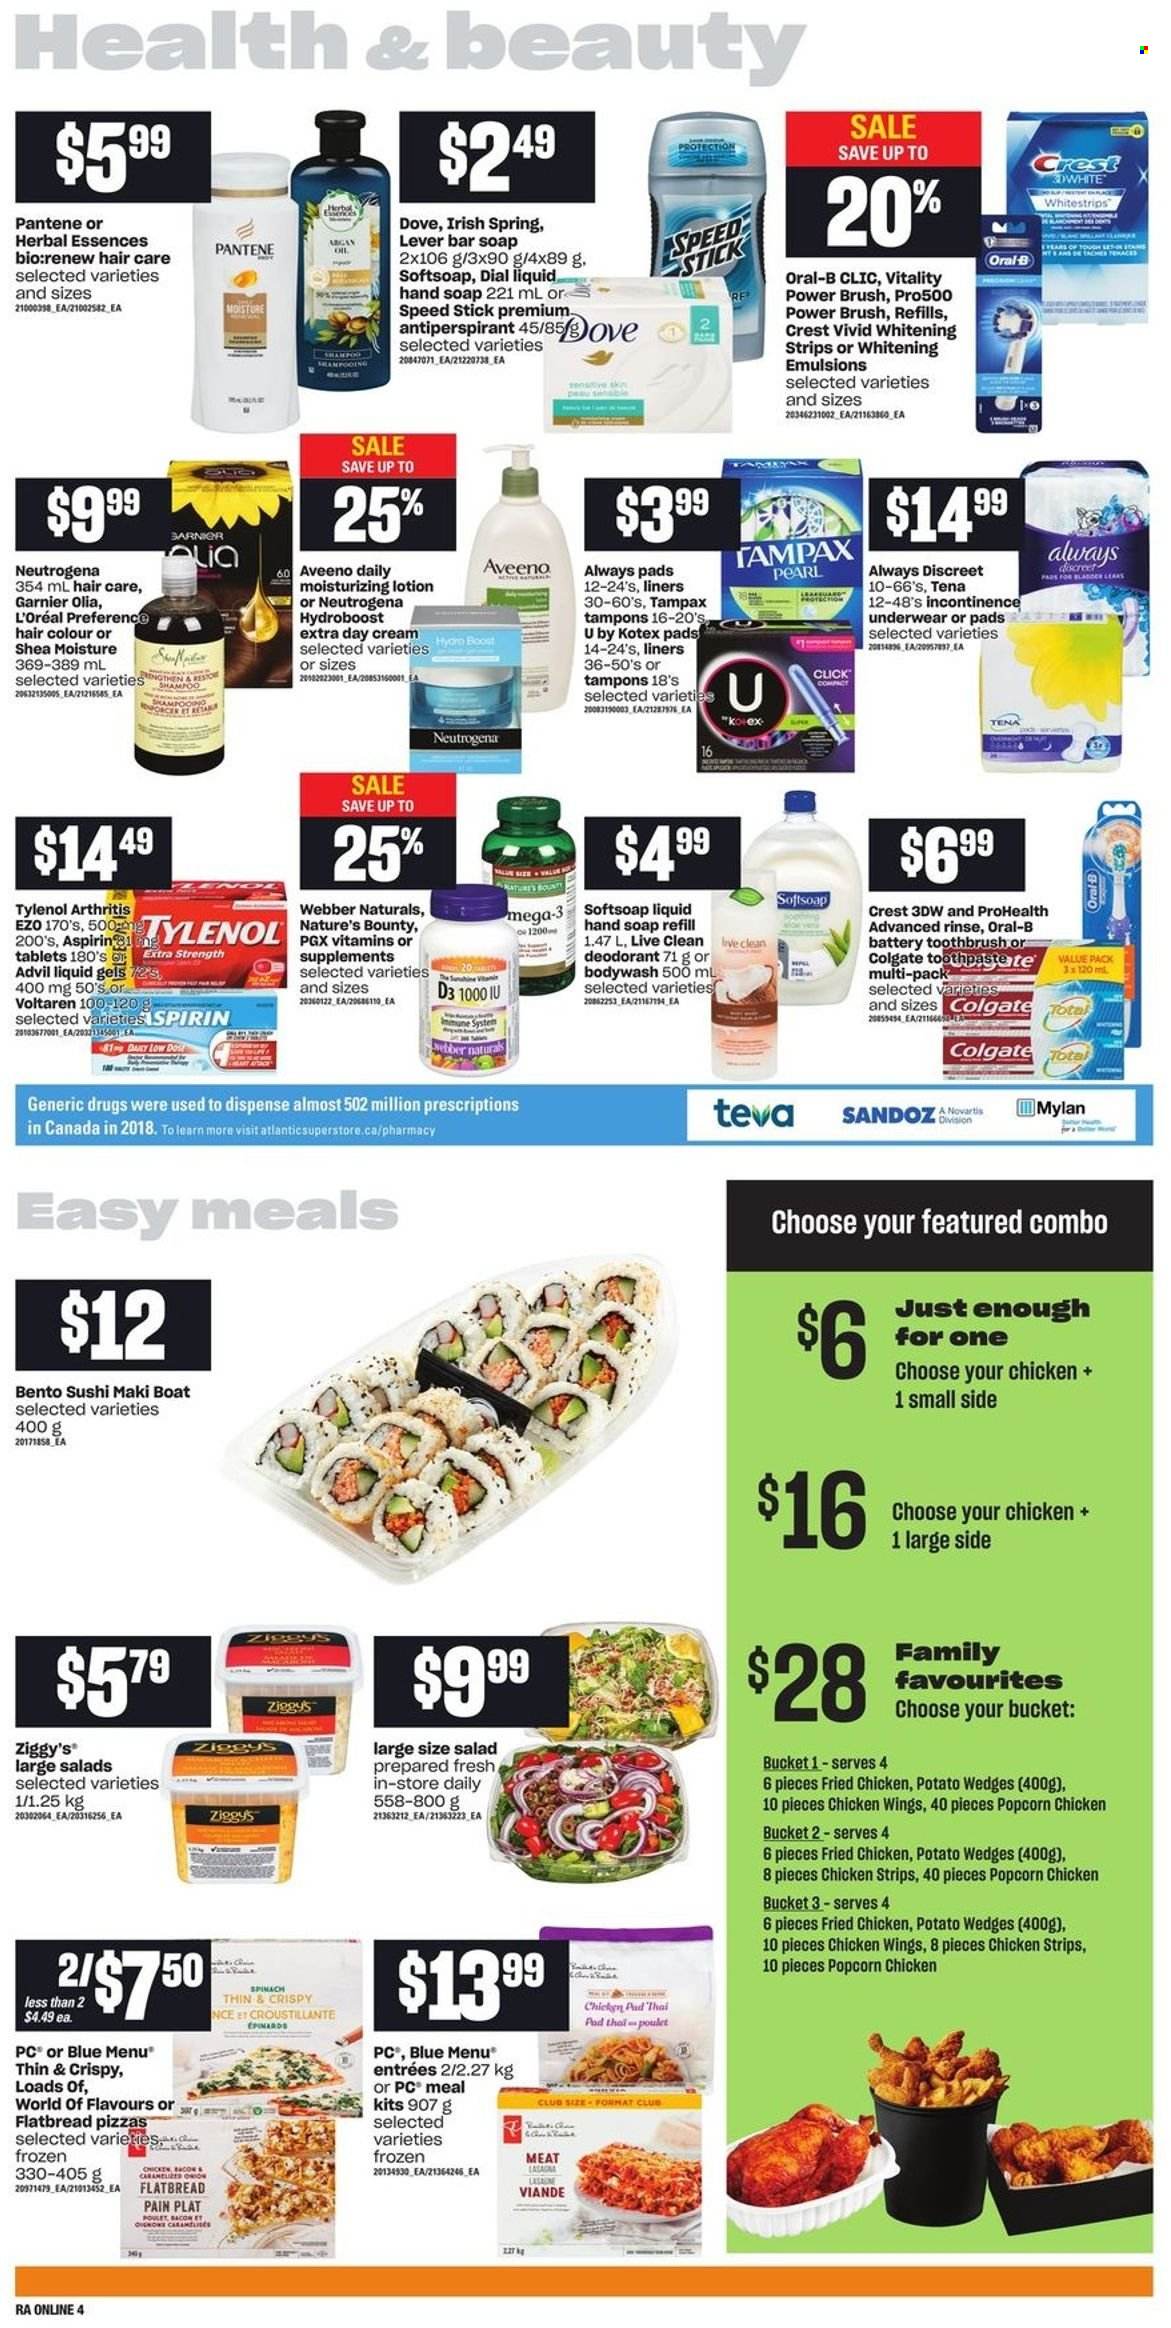 thumbnail - Atlantic Superstore Flyer - November 25, 2021 - December 01, 2021 - Sales products - flatbread, pizza, fried chicken, bacon, chicken wings, strips, chicken strips, potato wedges, popcorn, Boost, Aveeno, Softsoap, hand soap, soap bar, Dial, soap, toothbrush, toothpaste, Crest, Always pads, Always Discreet, Kotex, Kotex pads, incontinence underwear, tampons, day cream, L’Oréal, hair color, Herbal Essences, body lotion, anti-perspirant, Speed Stick, Nature's Bounty, Tylenol, Advil Rapid, vitamin D3, aspirin, Dove, Colgate, Garnier, Neutrogena, Tampax, Pantene, Oral-B, deodorant. Page 9.